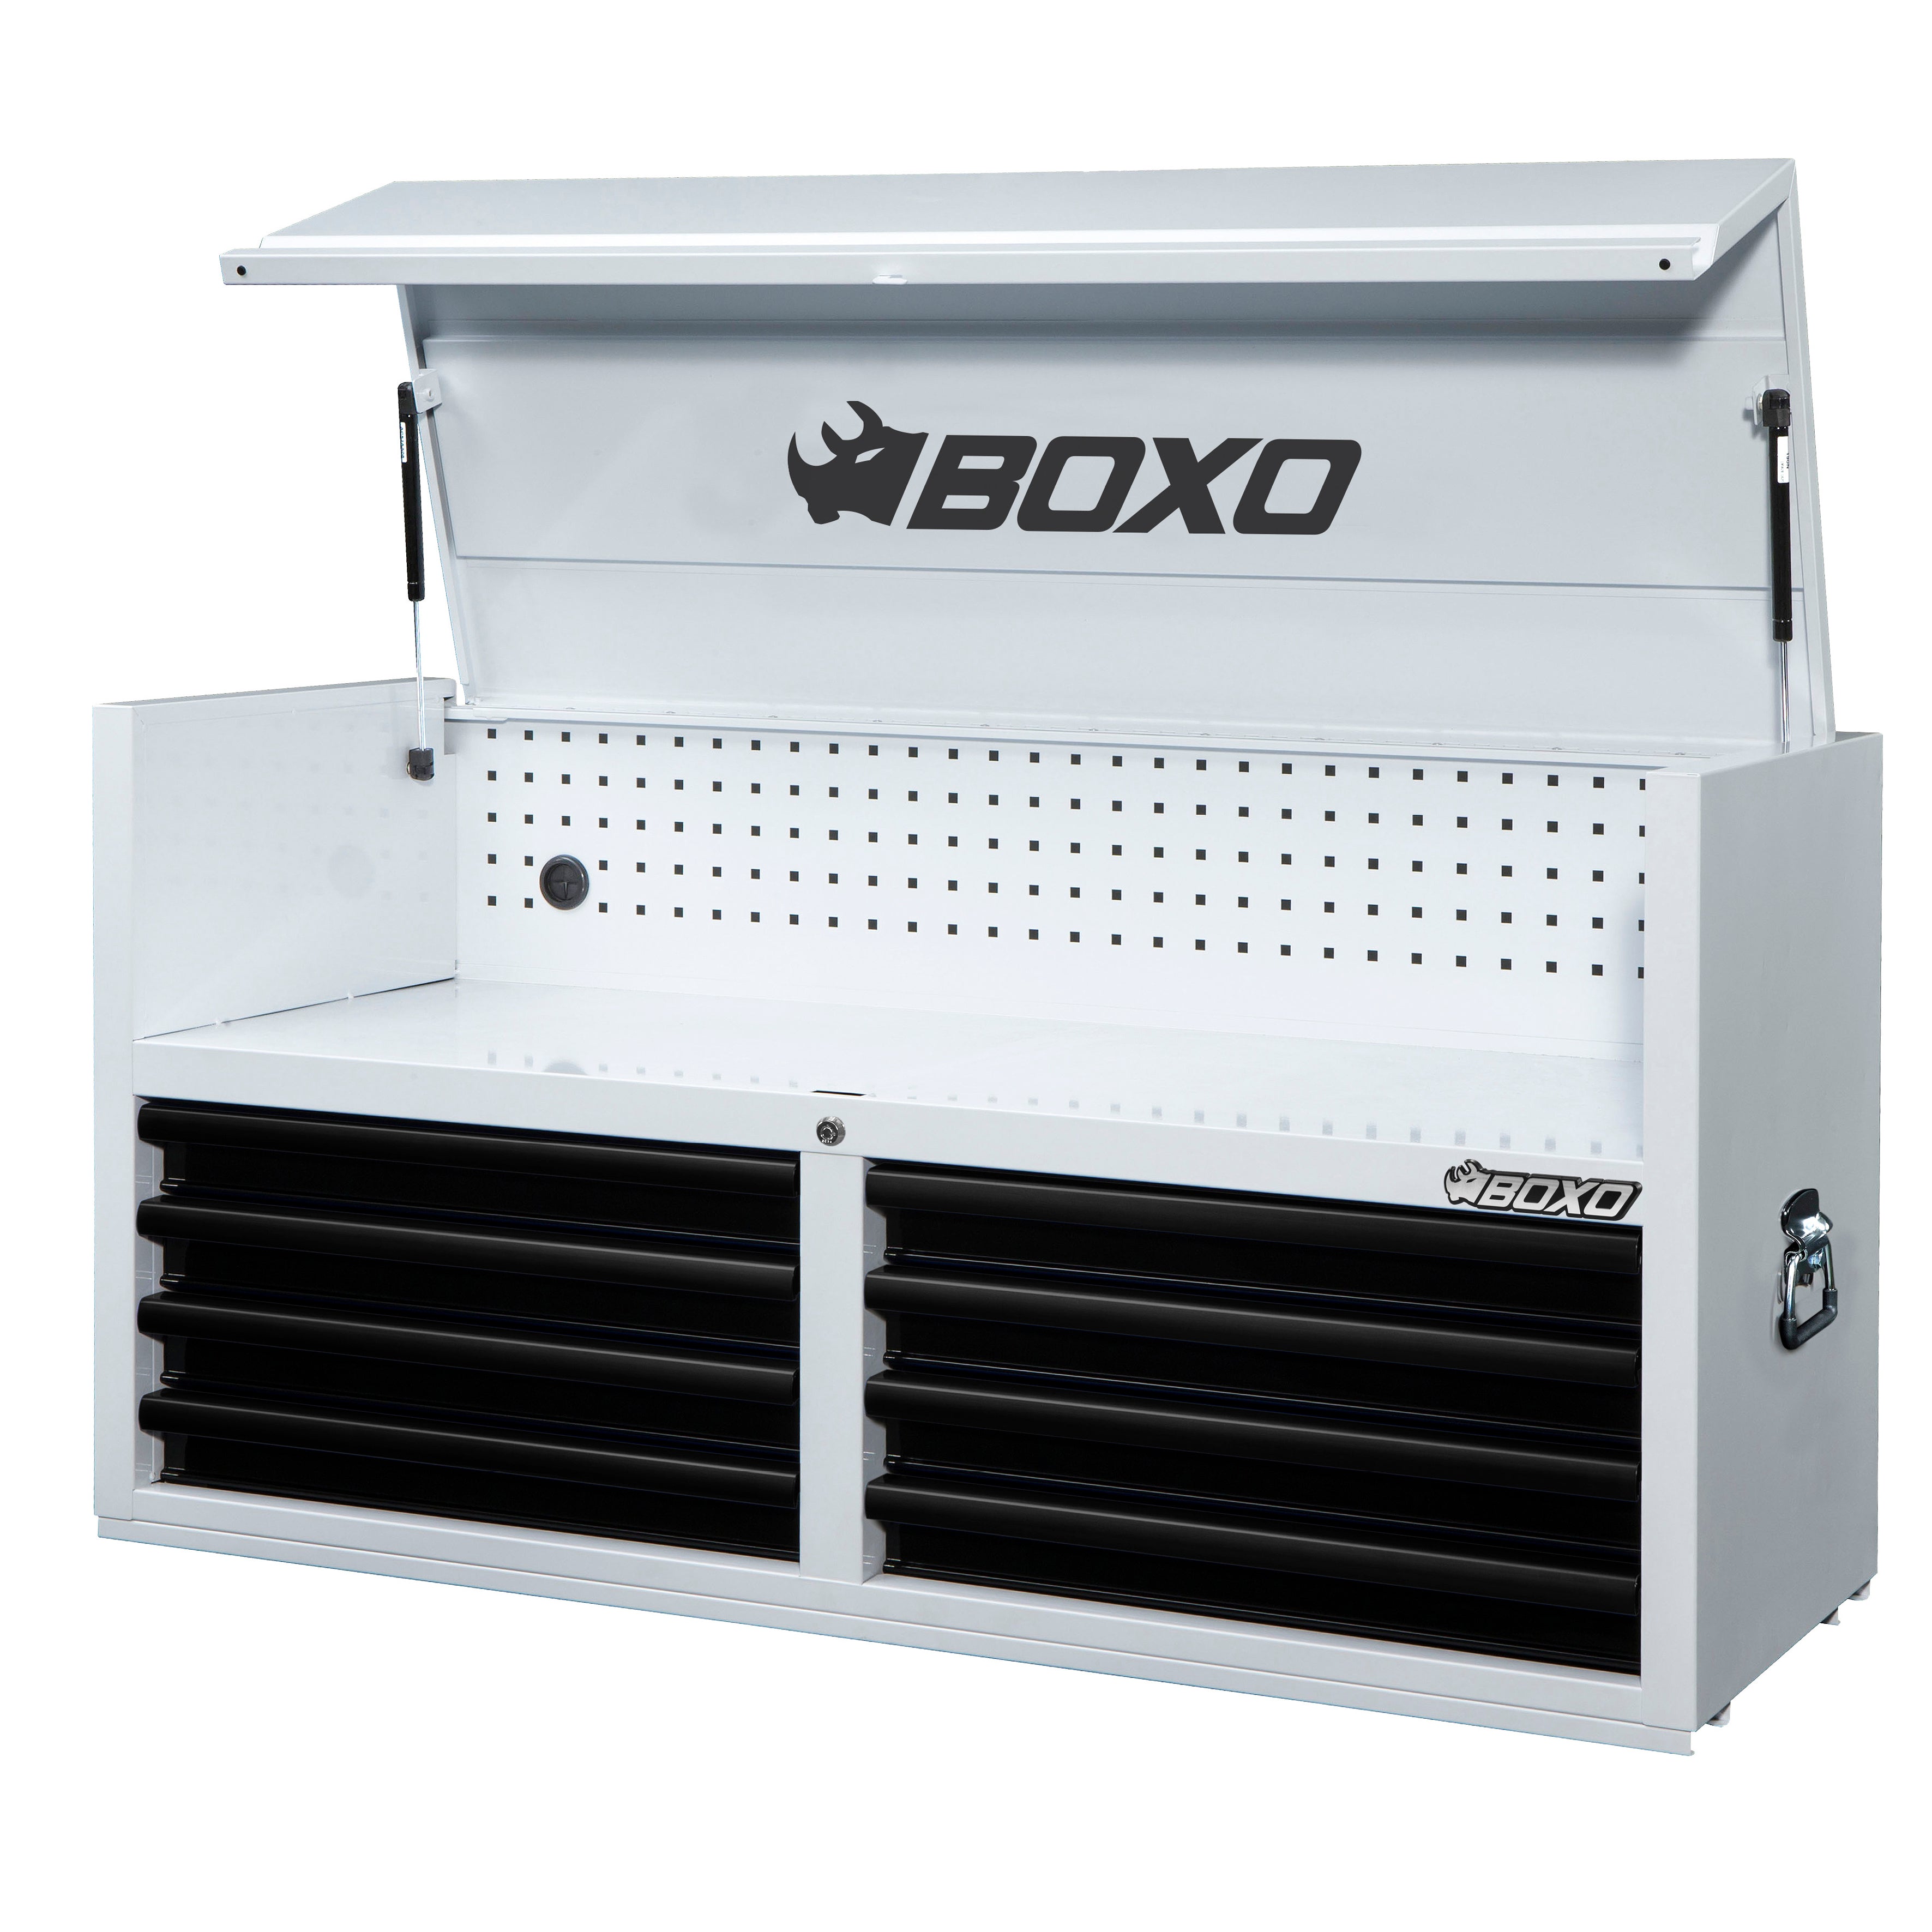 BOXO 53" 8 Drawer Top Box with Drawer Trim Pack - White Body & Trim Colour Options